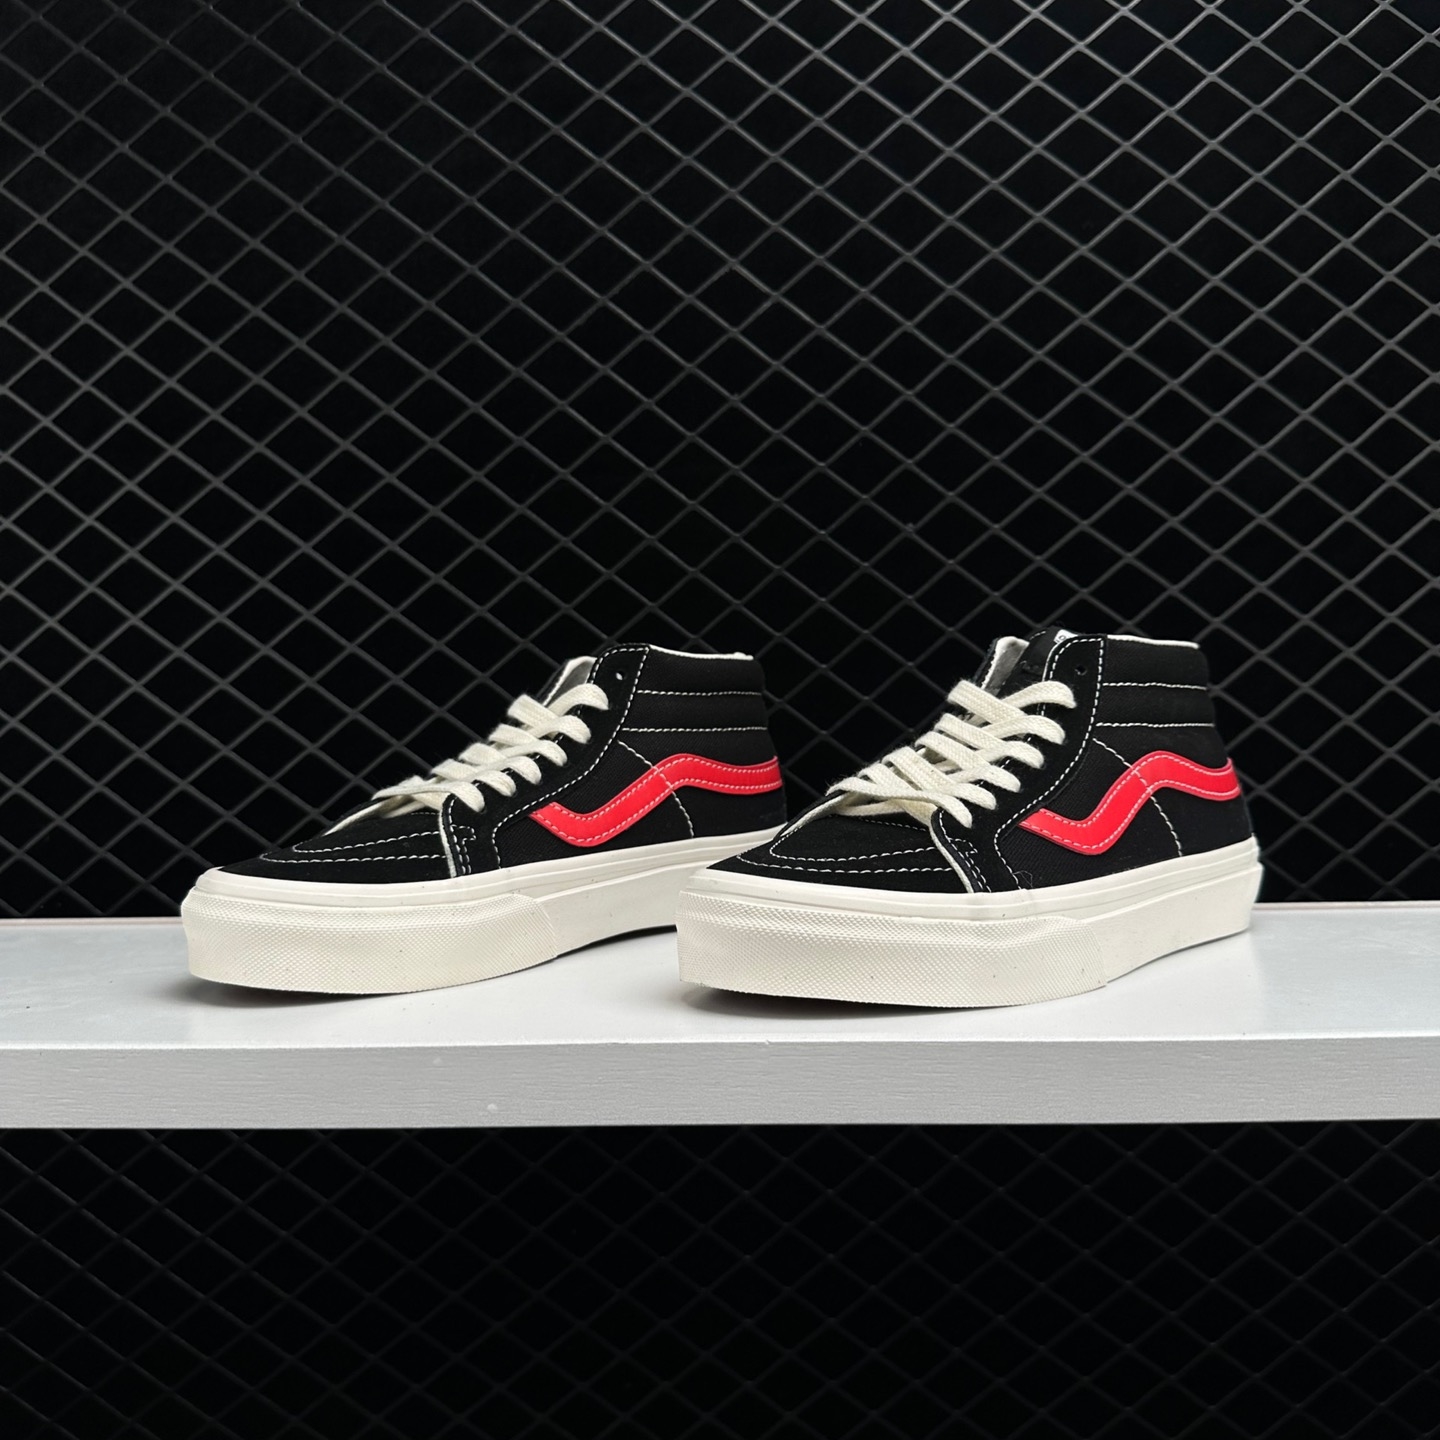 Vans SK8-Mid Black-Red 'Black Red' VN0A391FTP2: Stylish and Bold Skate Shoes